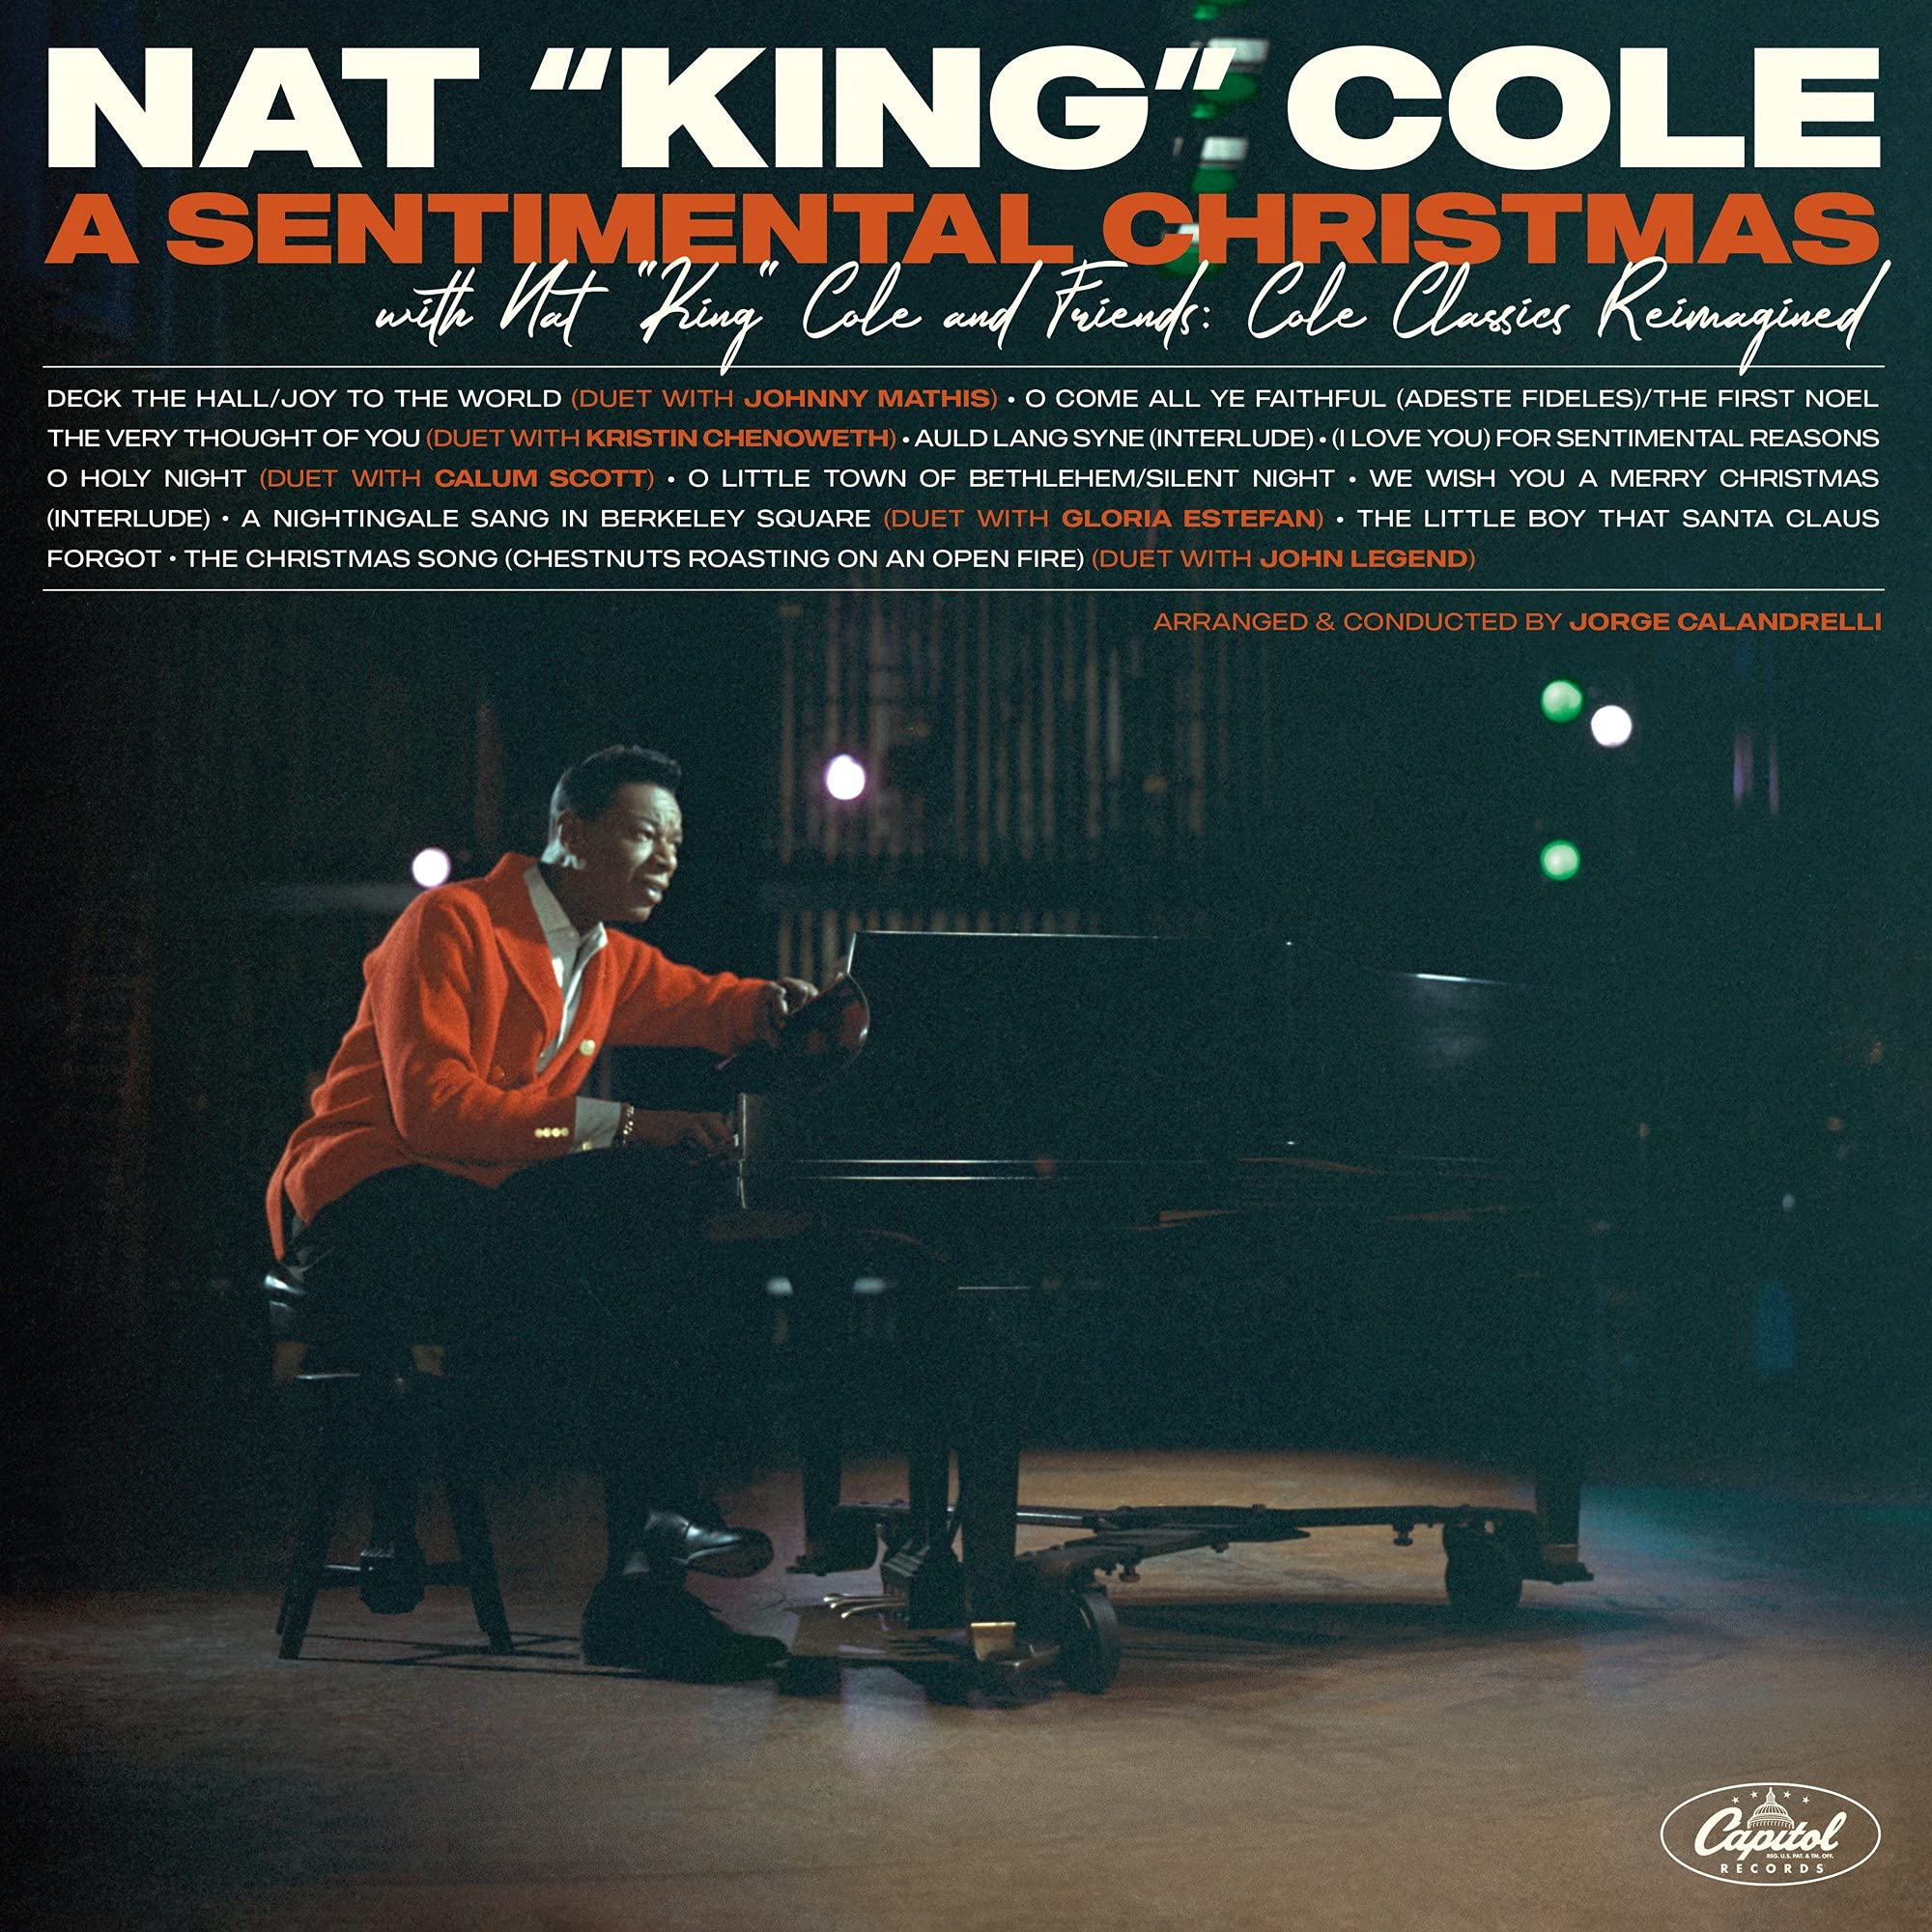 A Sentimental Christmas With Nat King Cole And Friends: Cole Classics Reimagined (Vinyl)